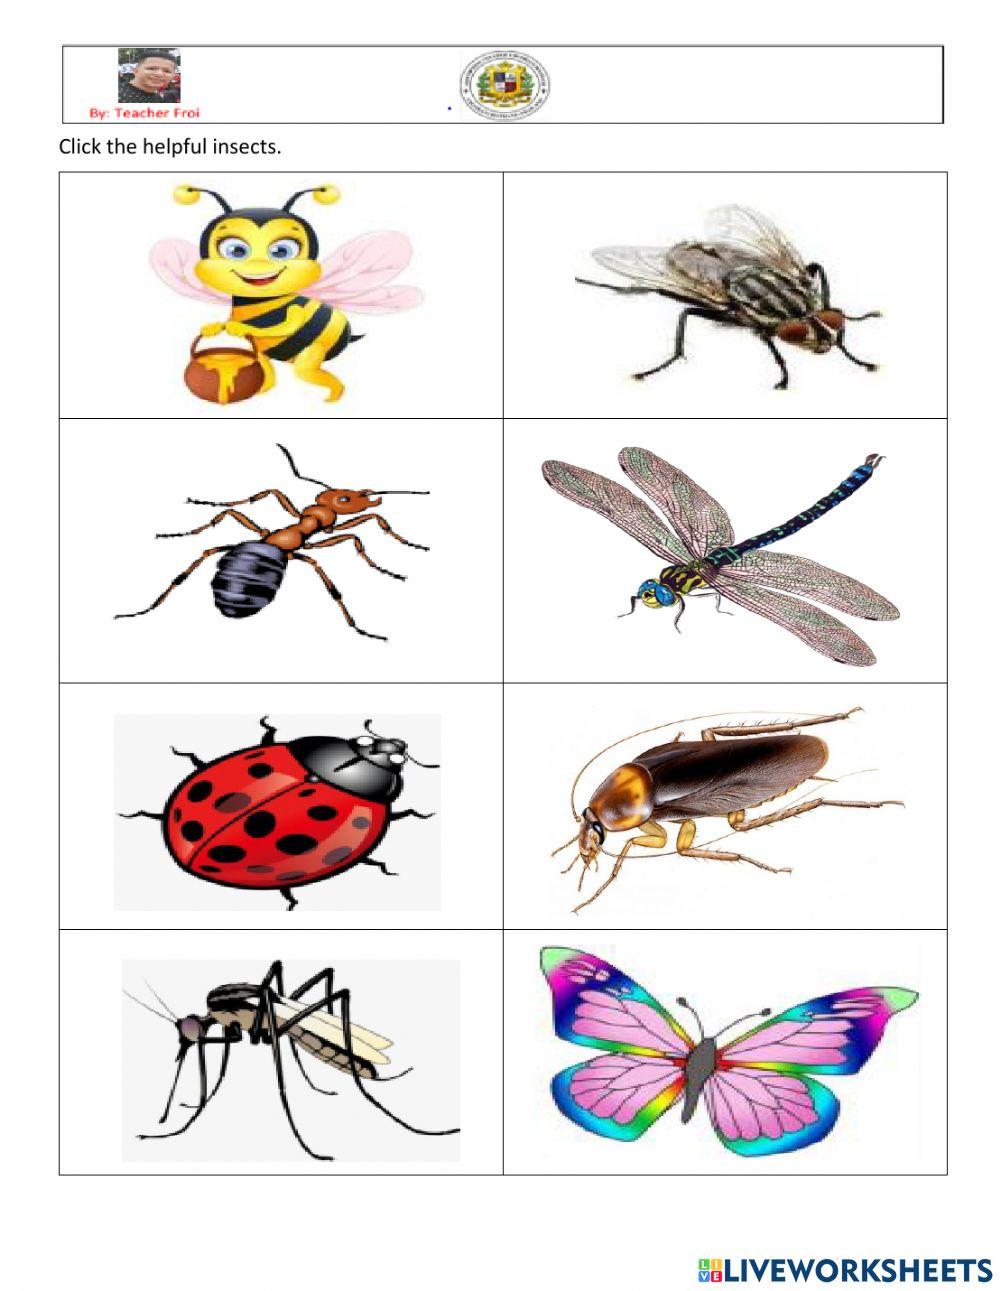 Helpful Insects